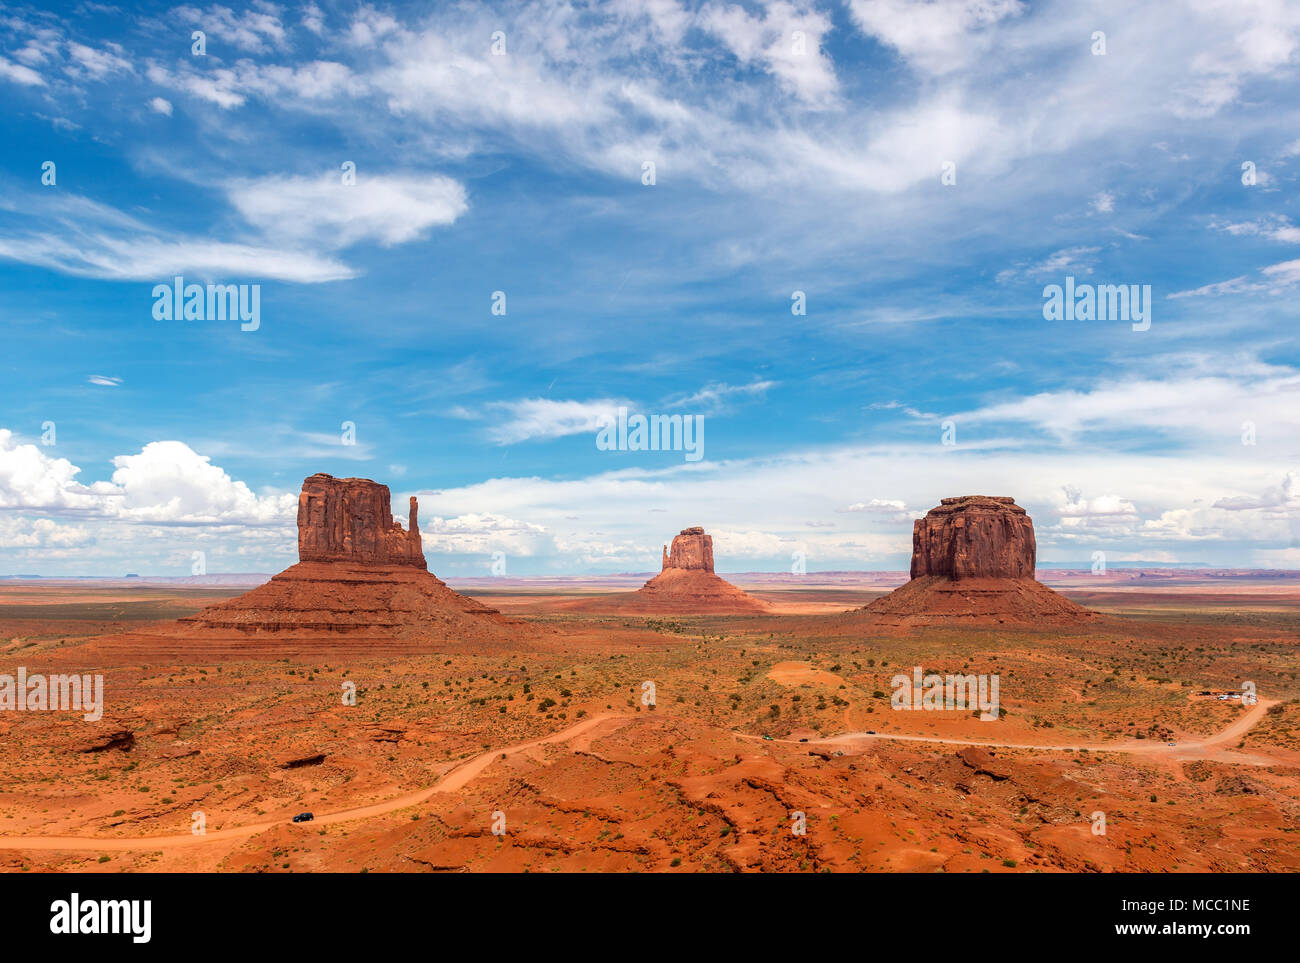 The world famous Merrick butte, East and West Mitten in Monument Valley inside the Navajo Nation in the state of Arizona and Utah, USA Stock Photo